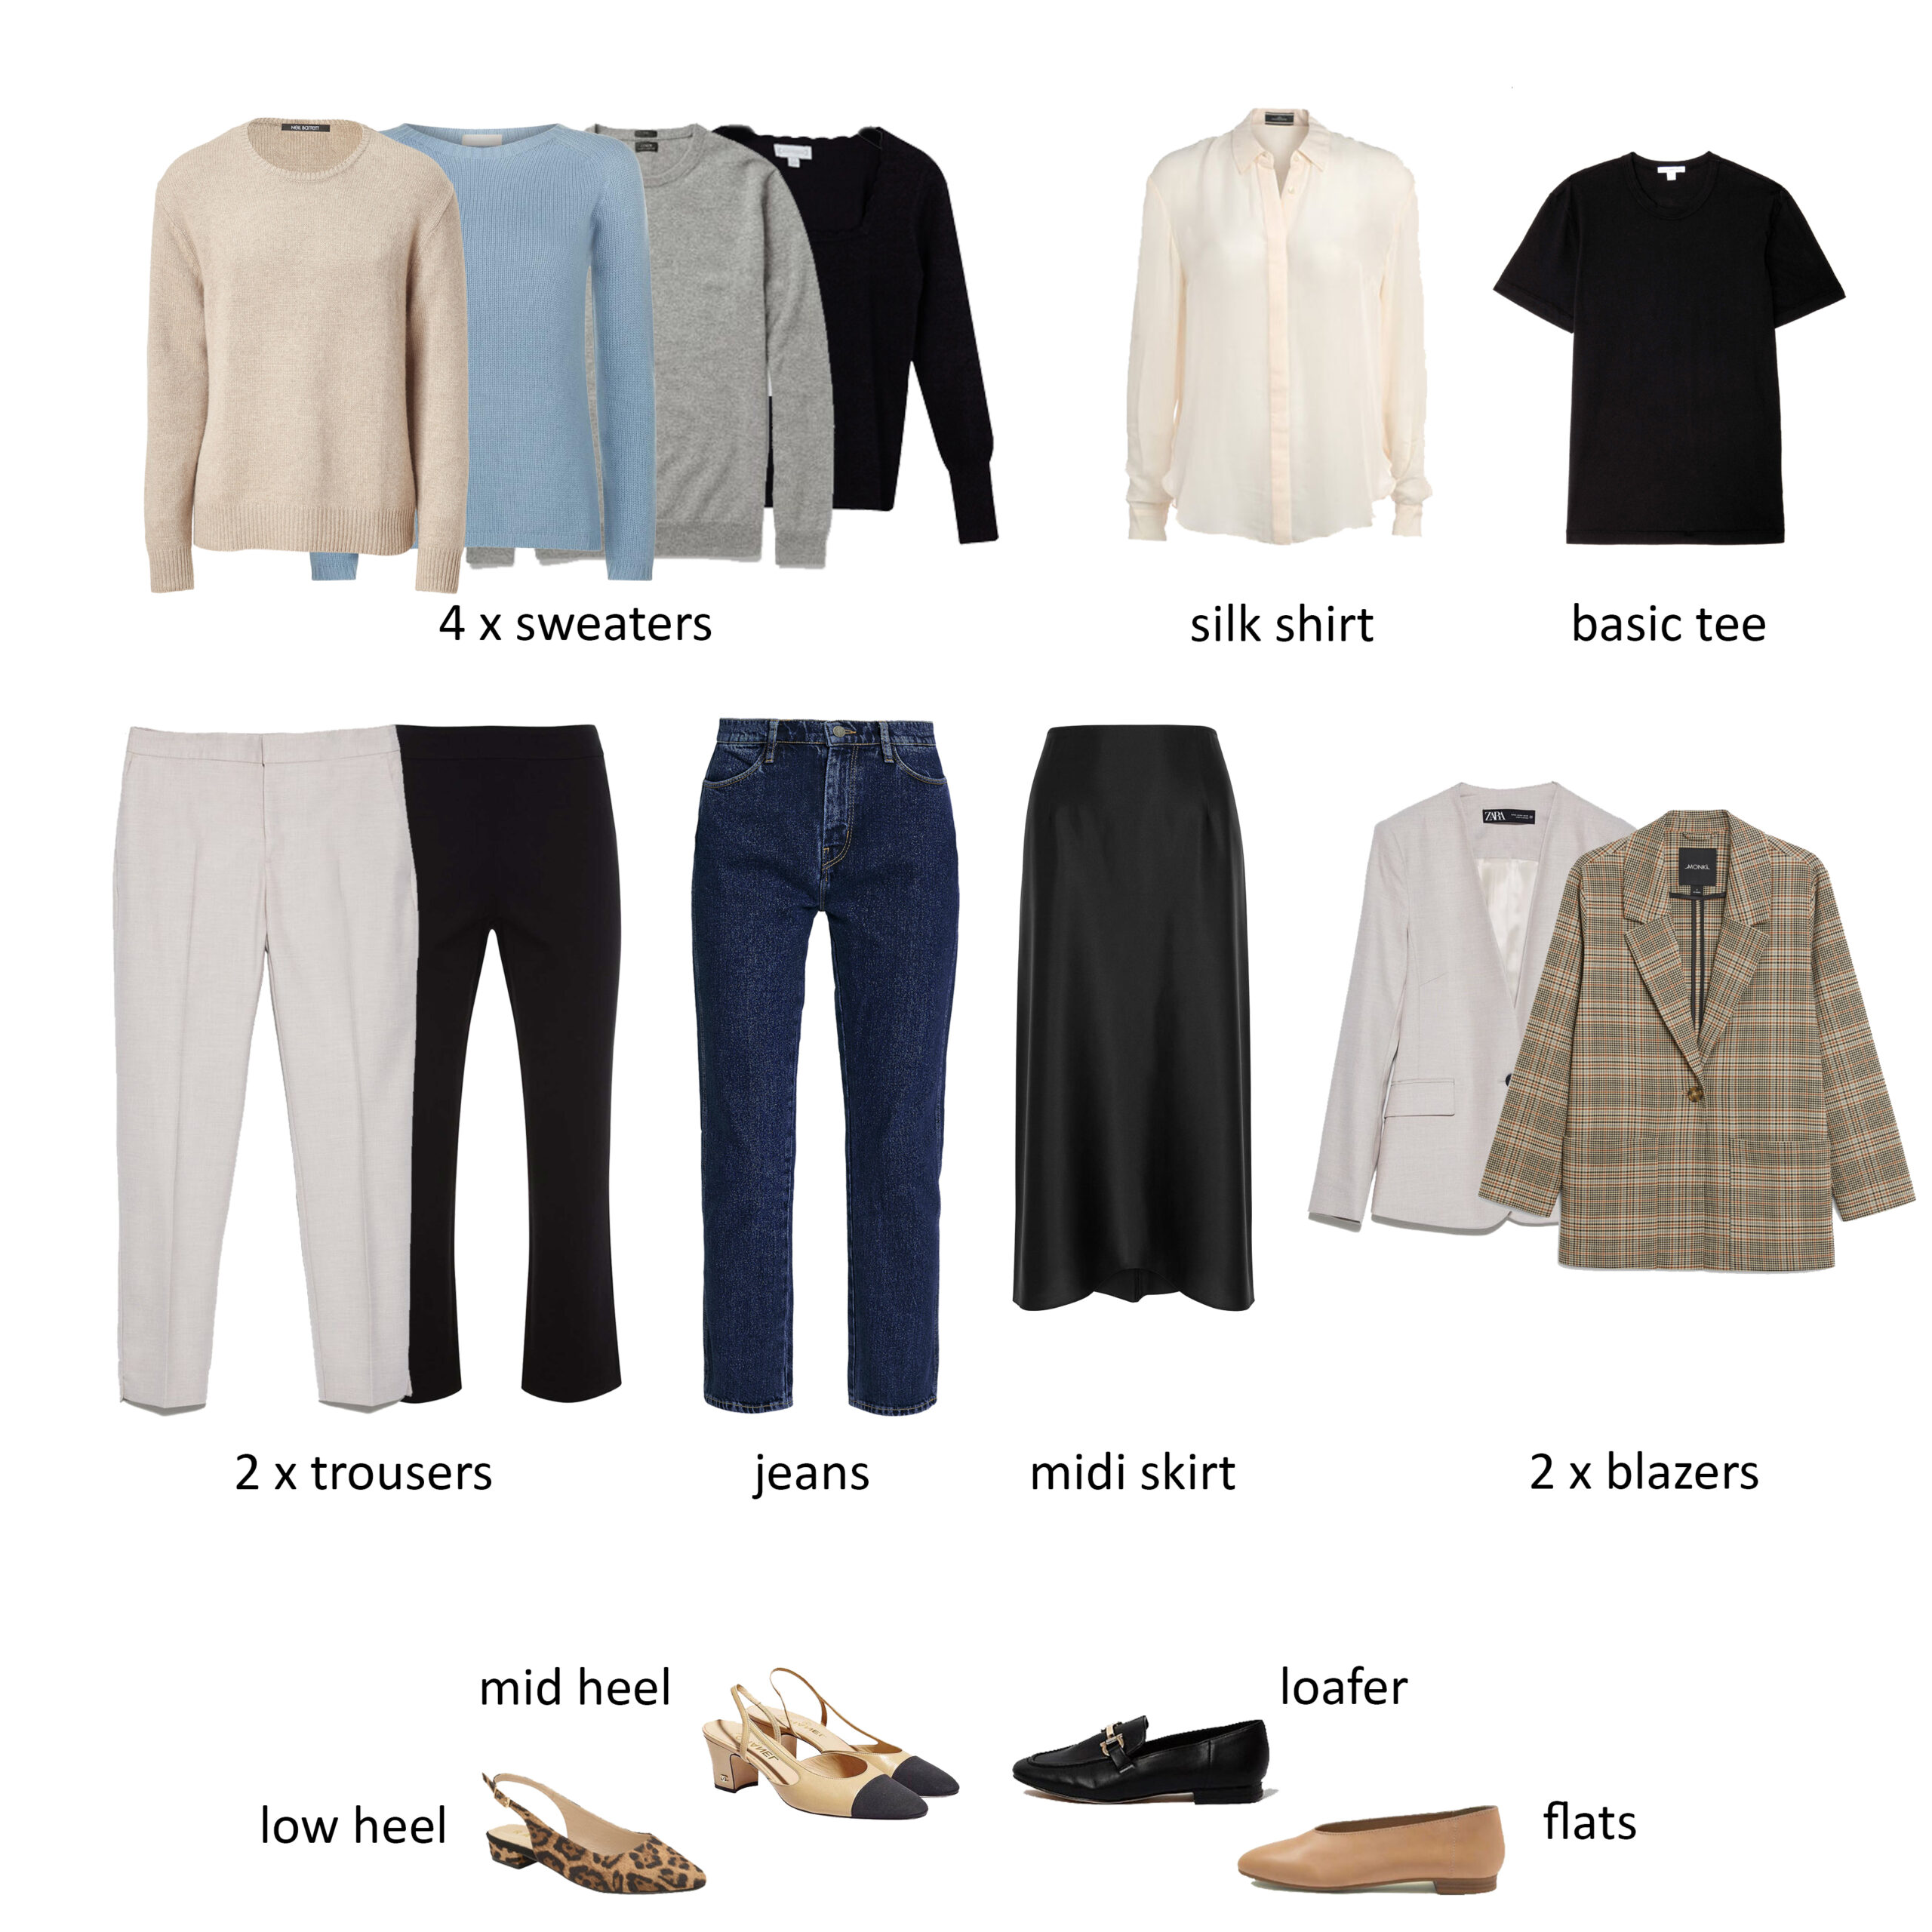 16 Piece Workwear Capsule | 192 Outfit Combinations | Gemma Mclean